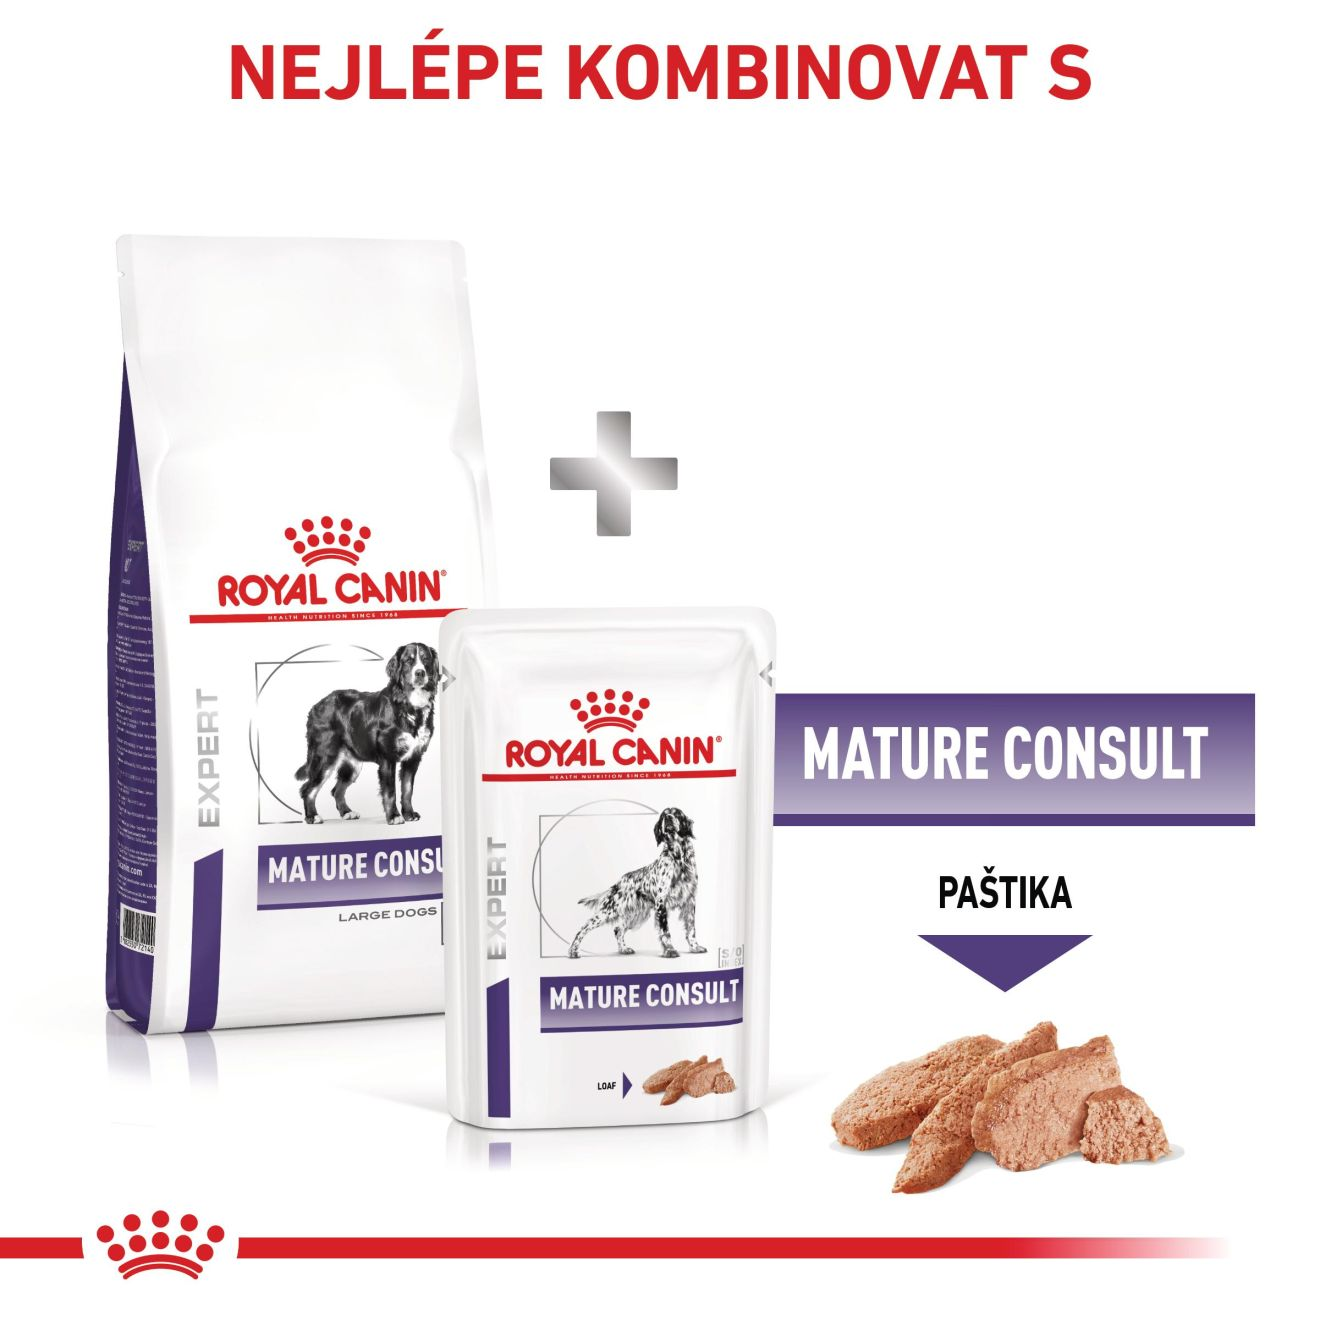 VHN Mature consult large dog